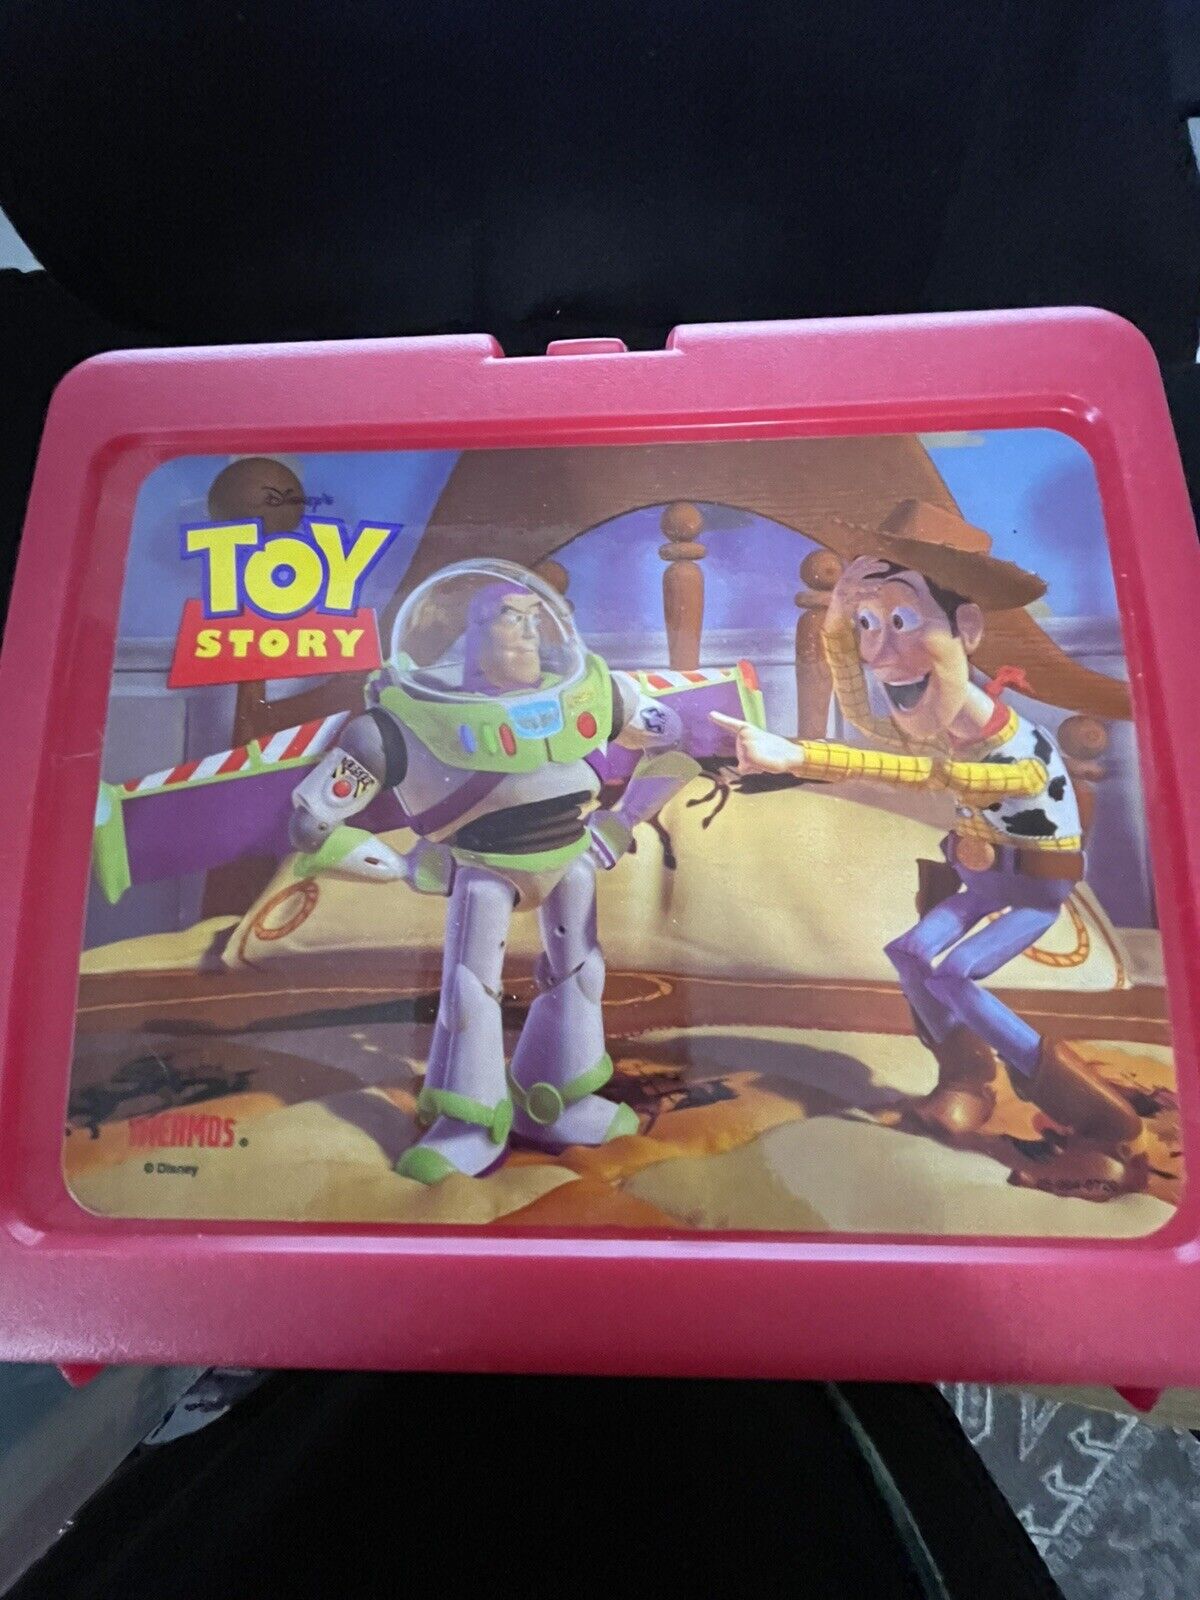 Vintage 1996 Toy Story Lunch Box Red Plastic 05-004-0720 No Thermos Woody Buzz